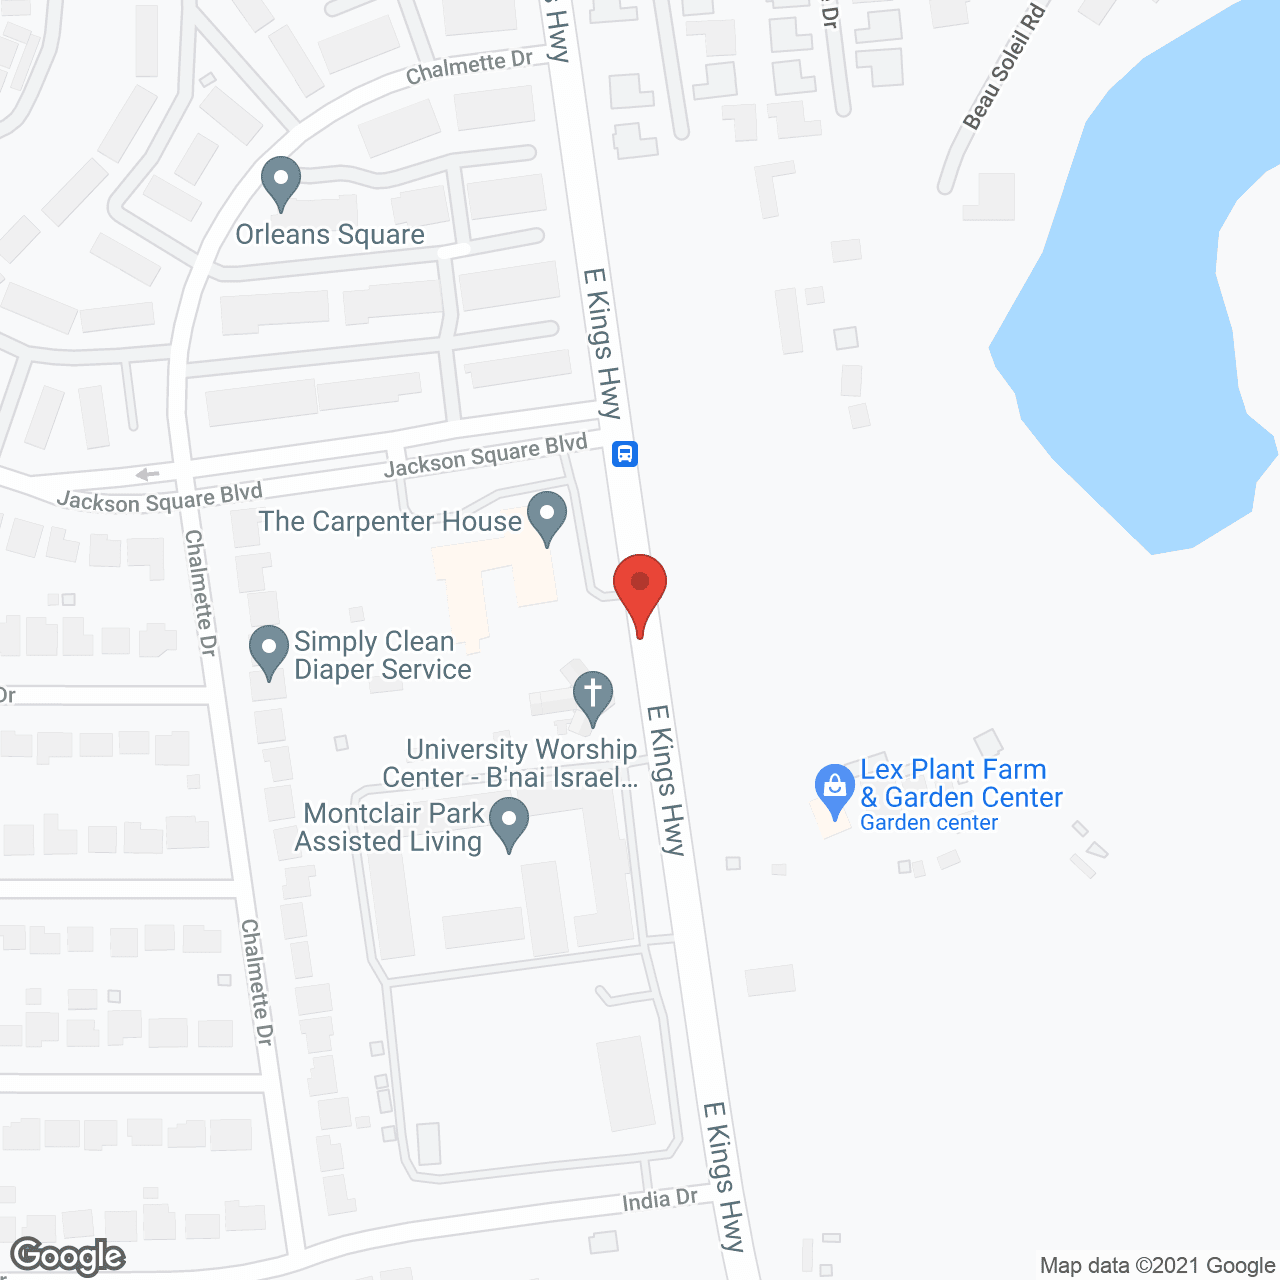 Montclair Park Assisted Living in google map